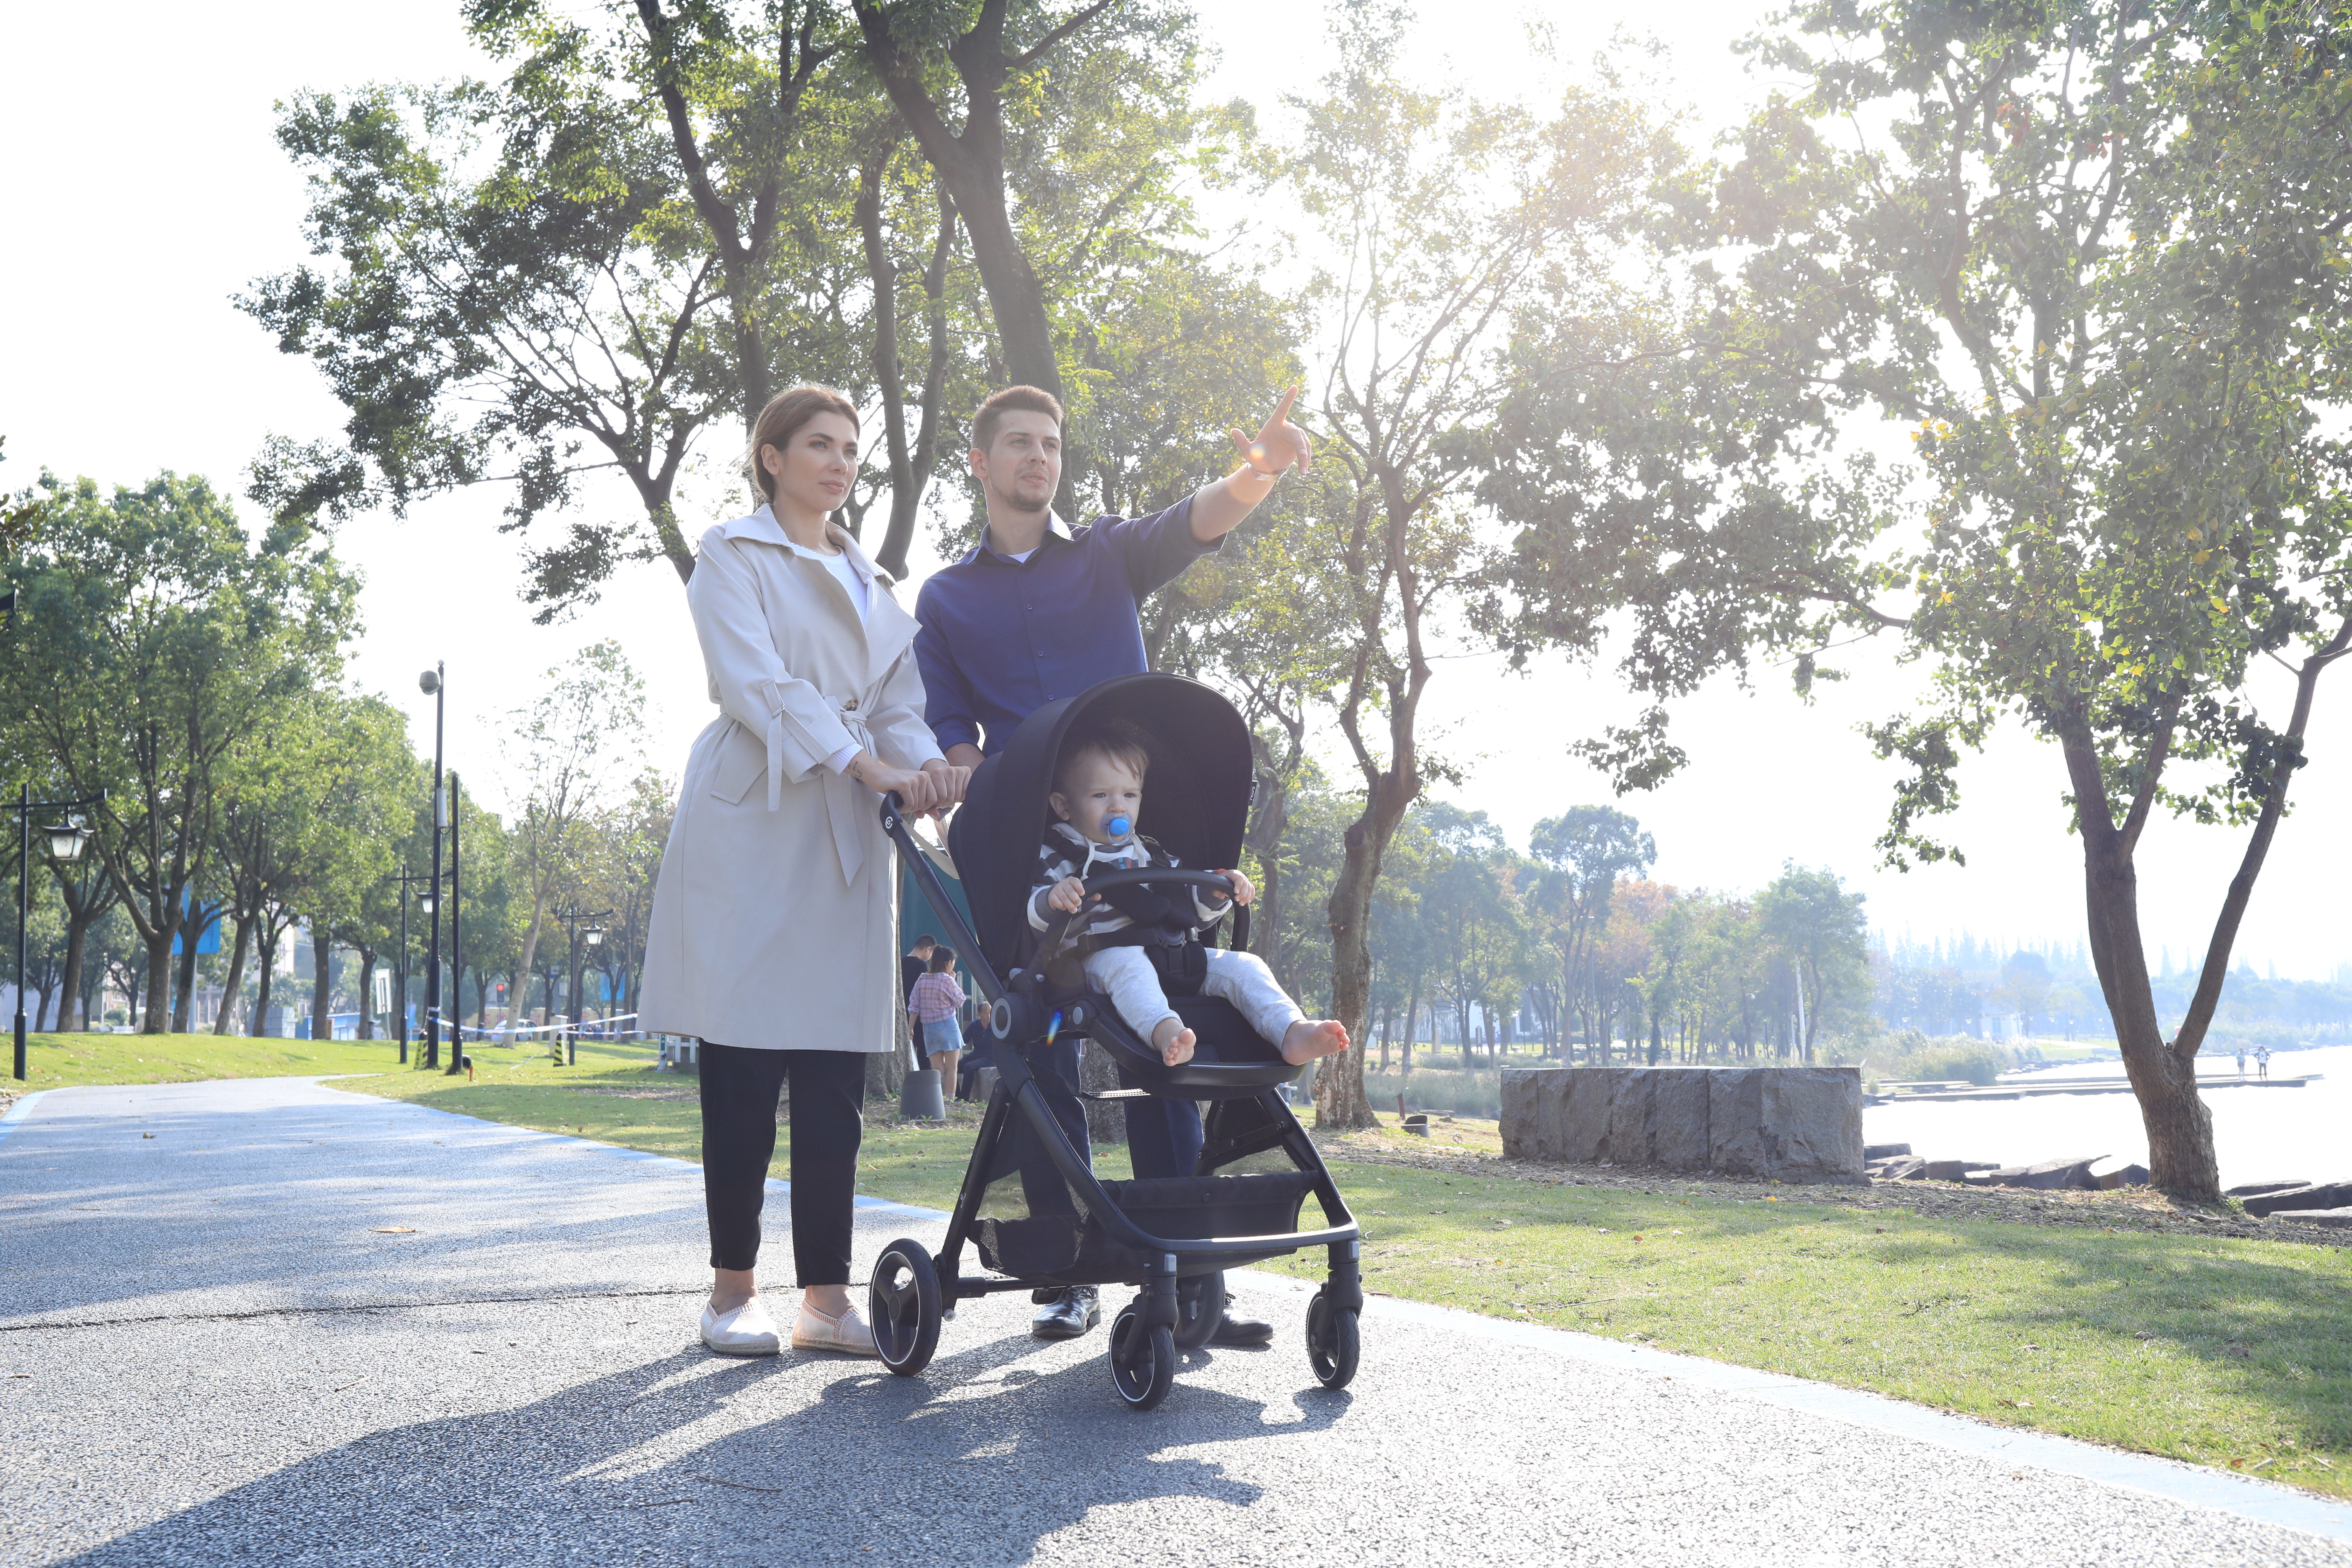 What factors attach great importance to the stroller of baby when traveling out?